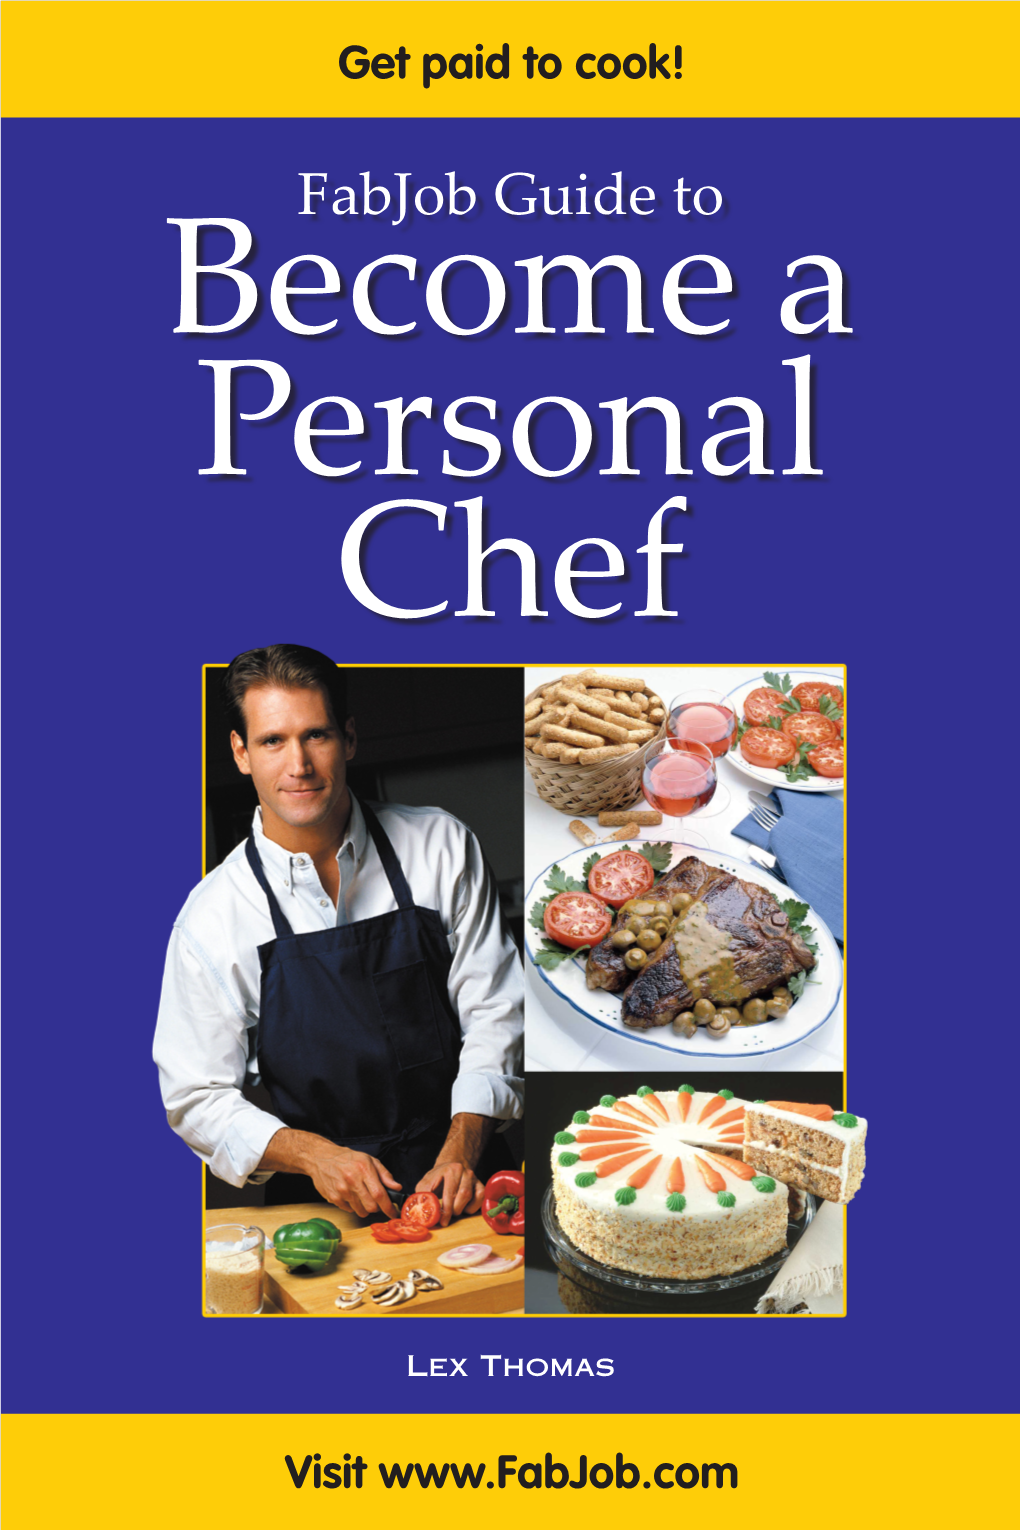 Fabjob Guide to Become a Personal Chef